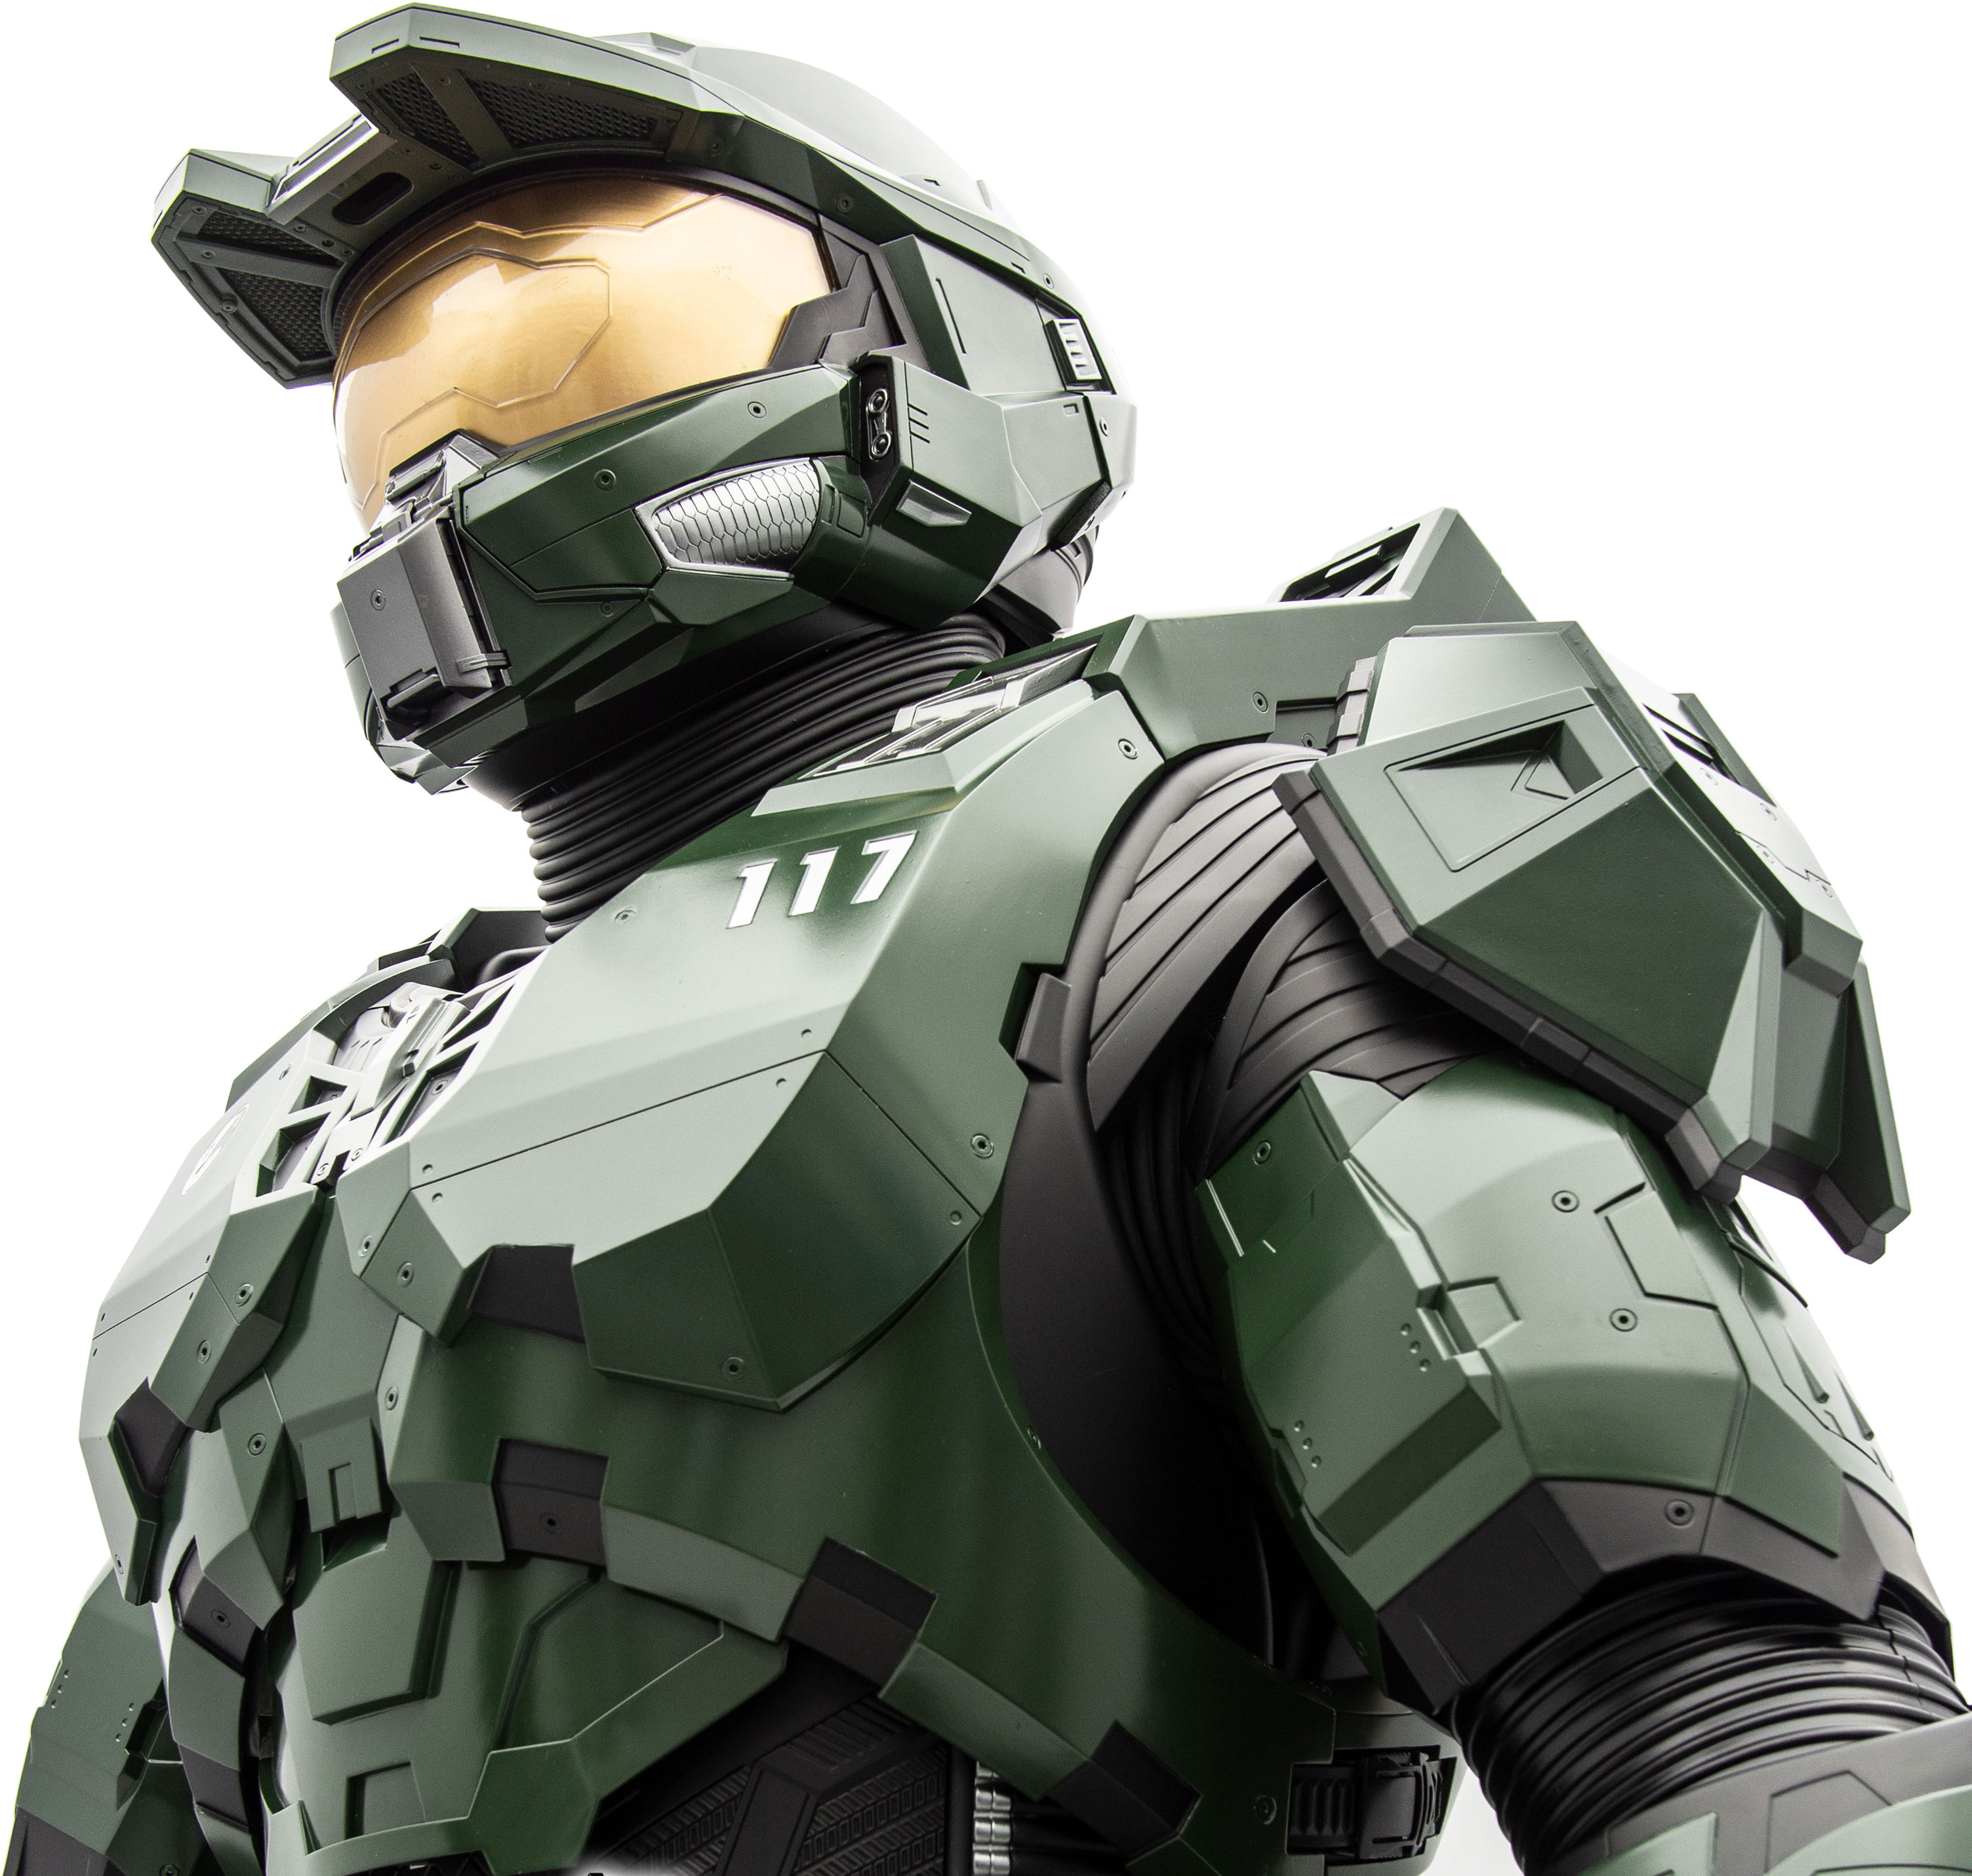 buy Wearable Halo TV Show Master Chief armor suit costume